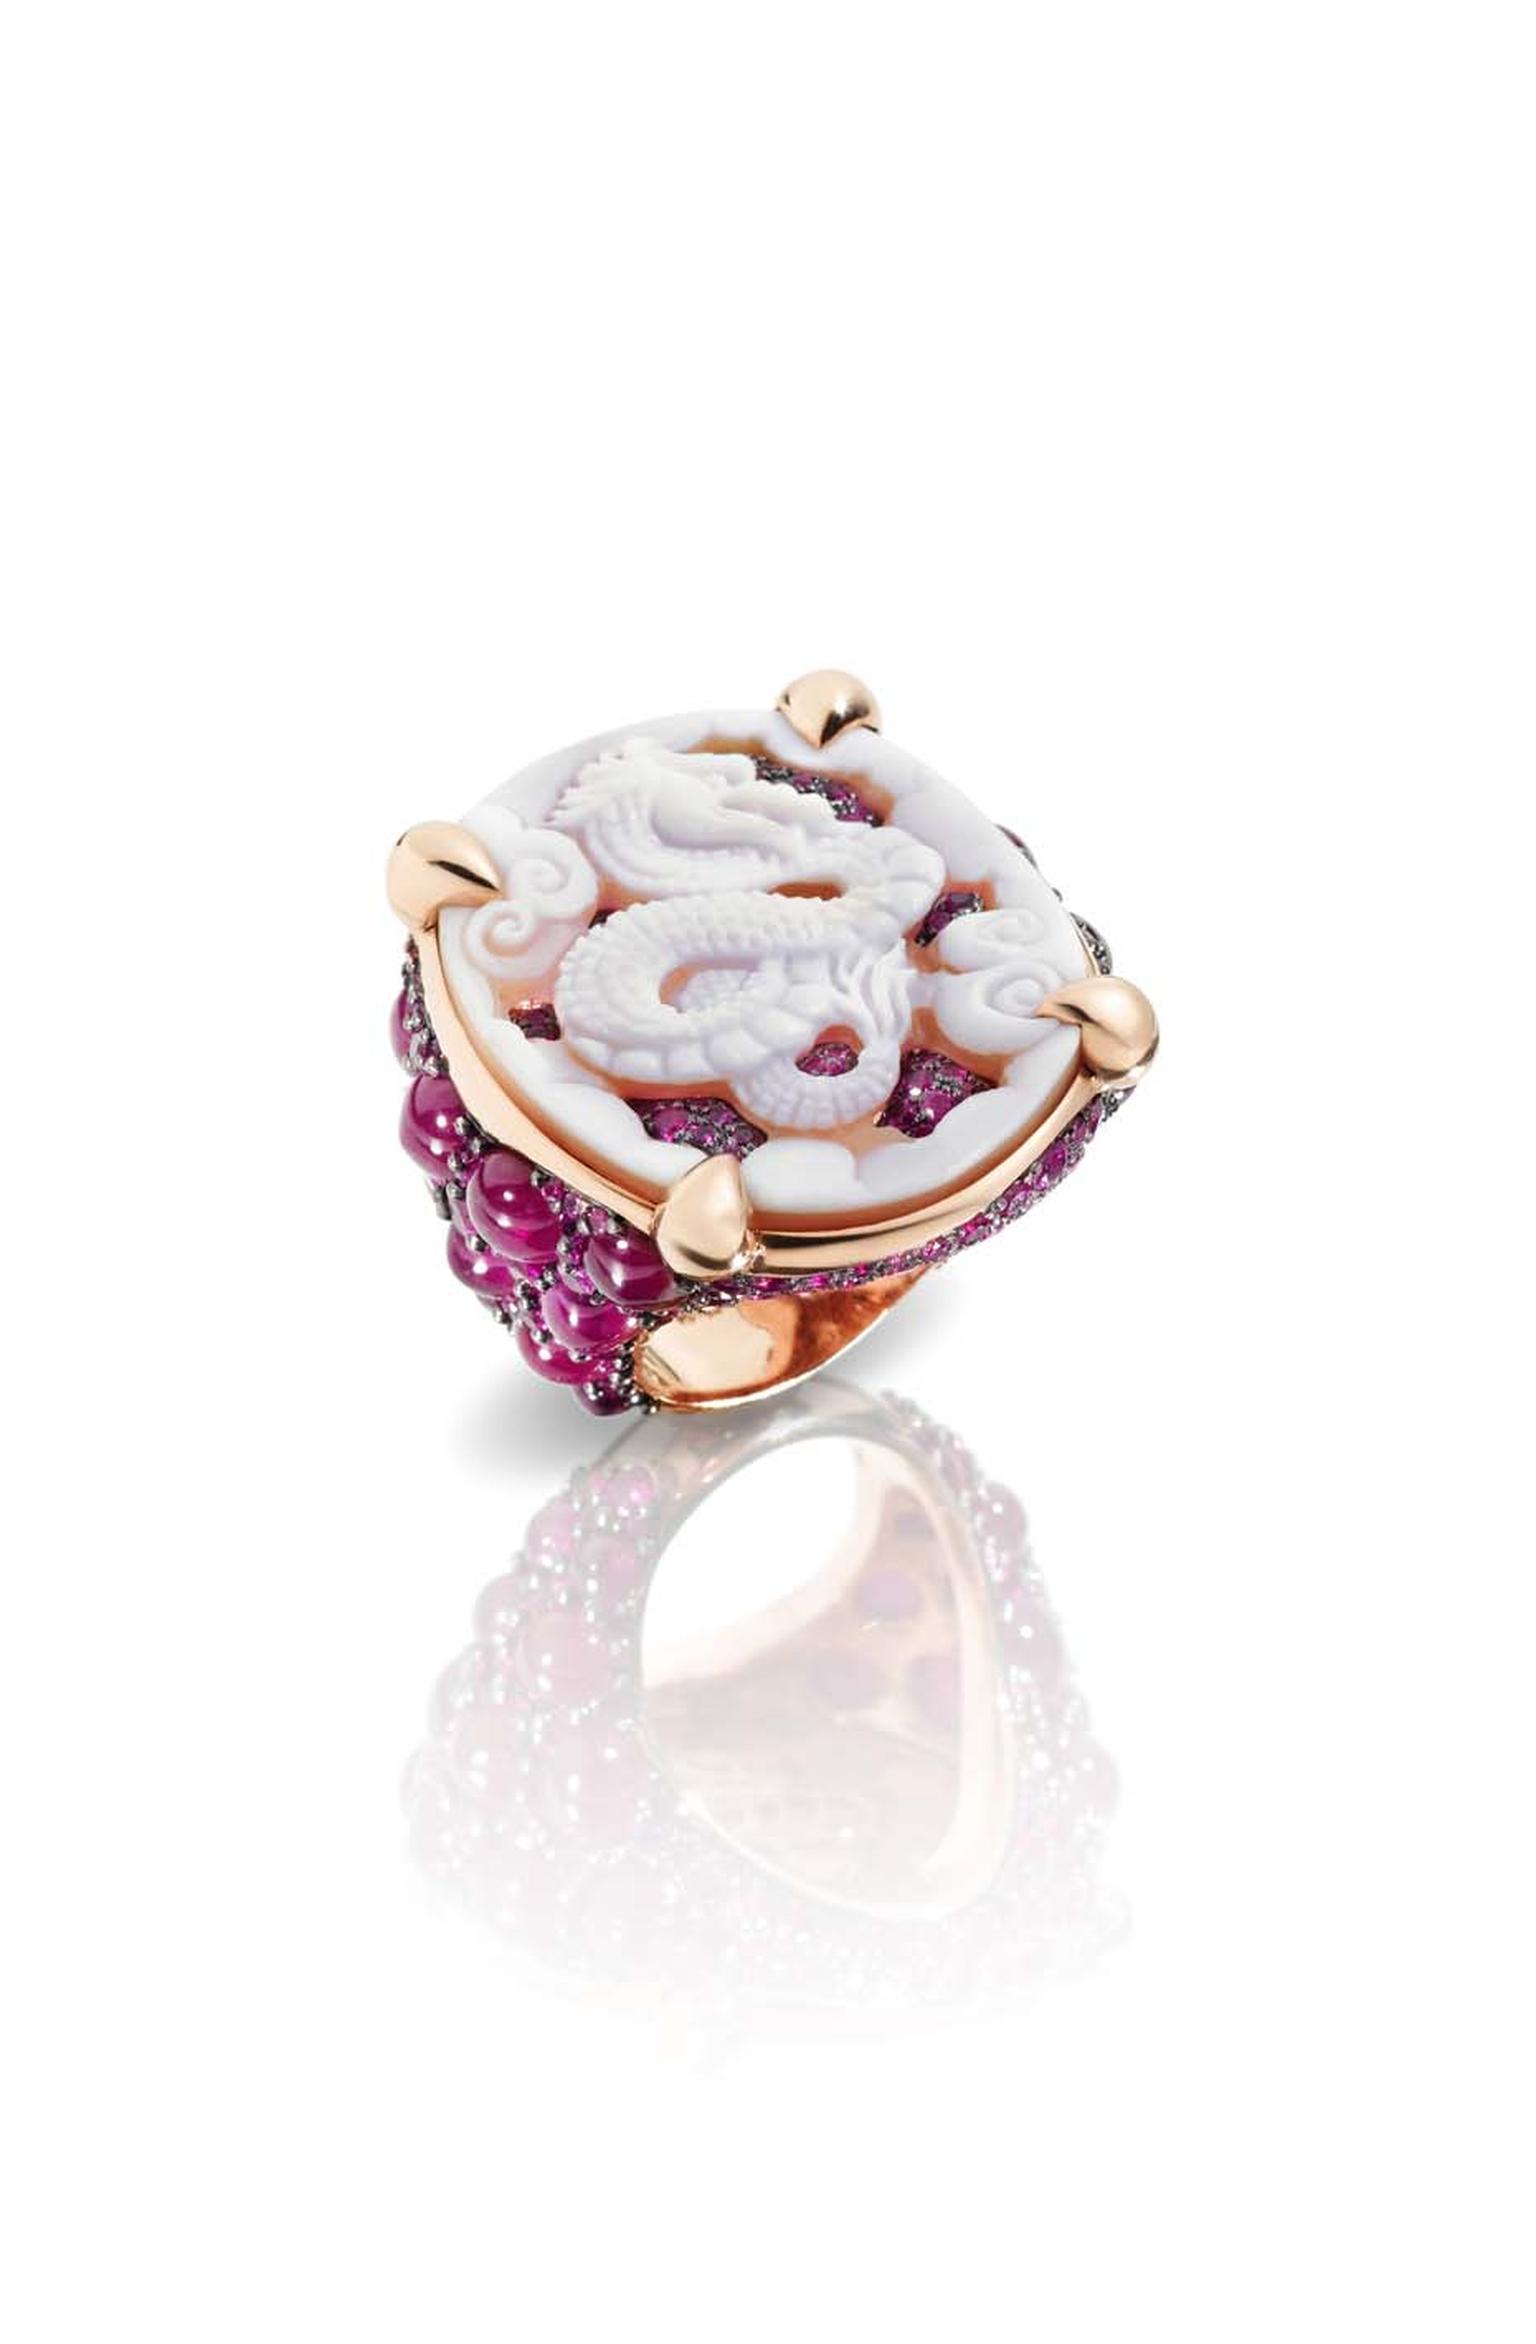 Pomellato Pom Pom Dragon ring in rose gold featuring a band covered with cabochon-cut rubies.